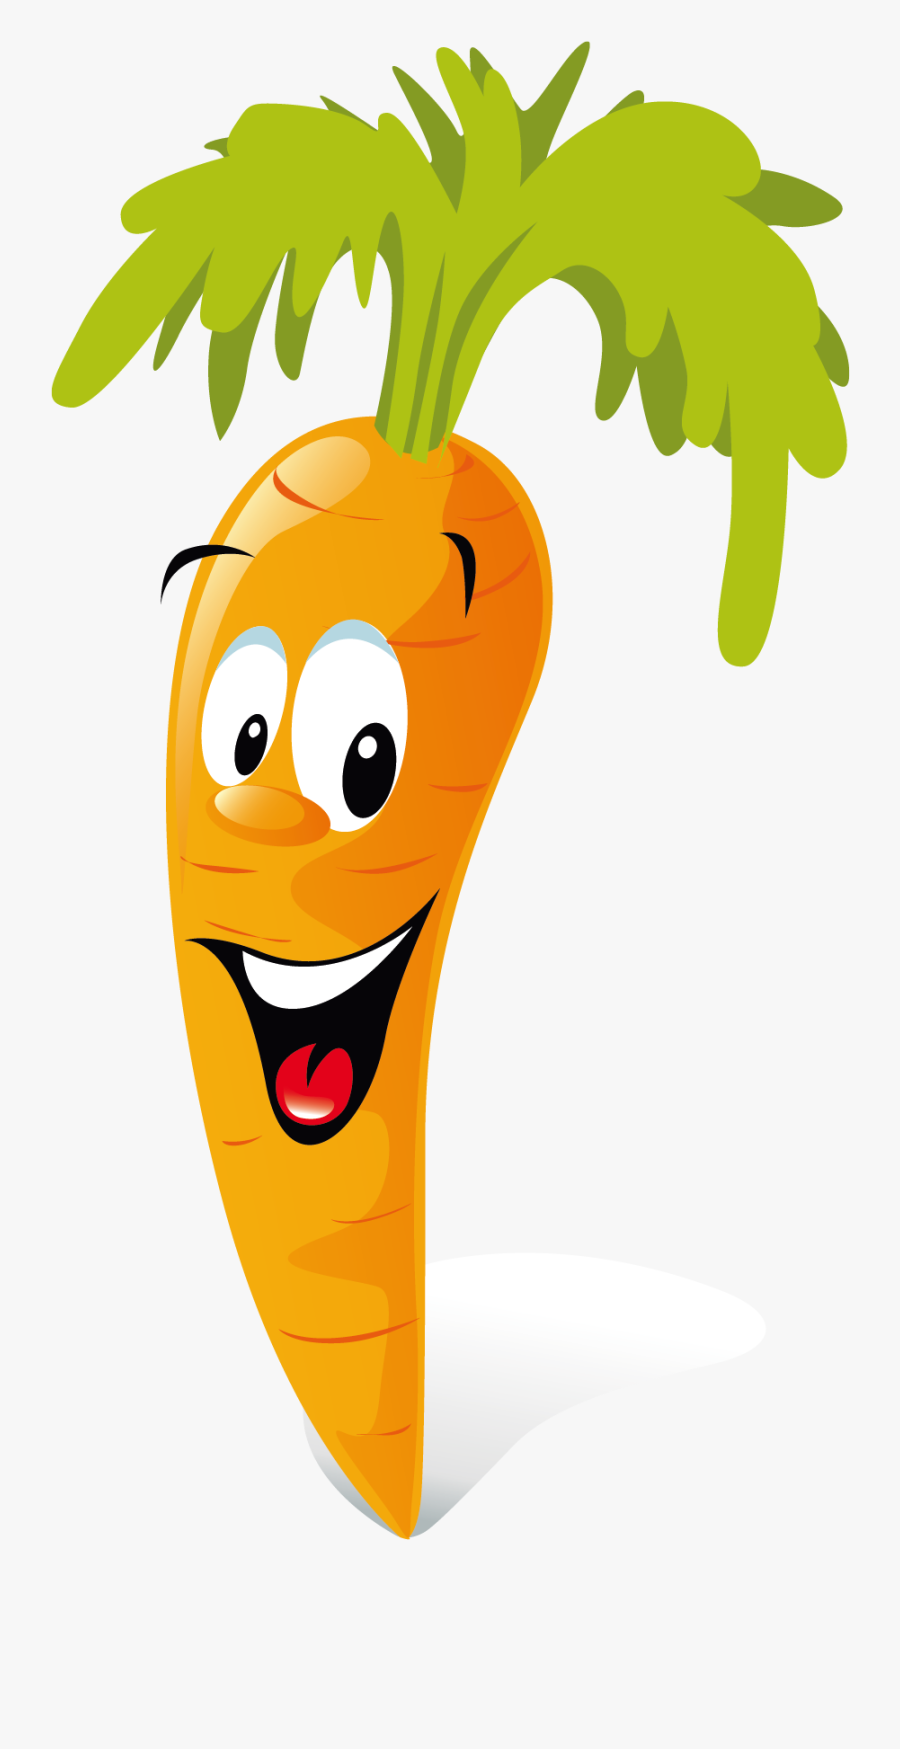 Carrot Animation Vegetable Clip Art - Single Fruits And Vegetables Cartoon, Transparent Clipart